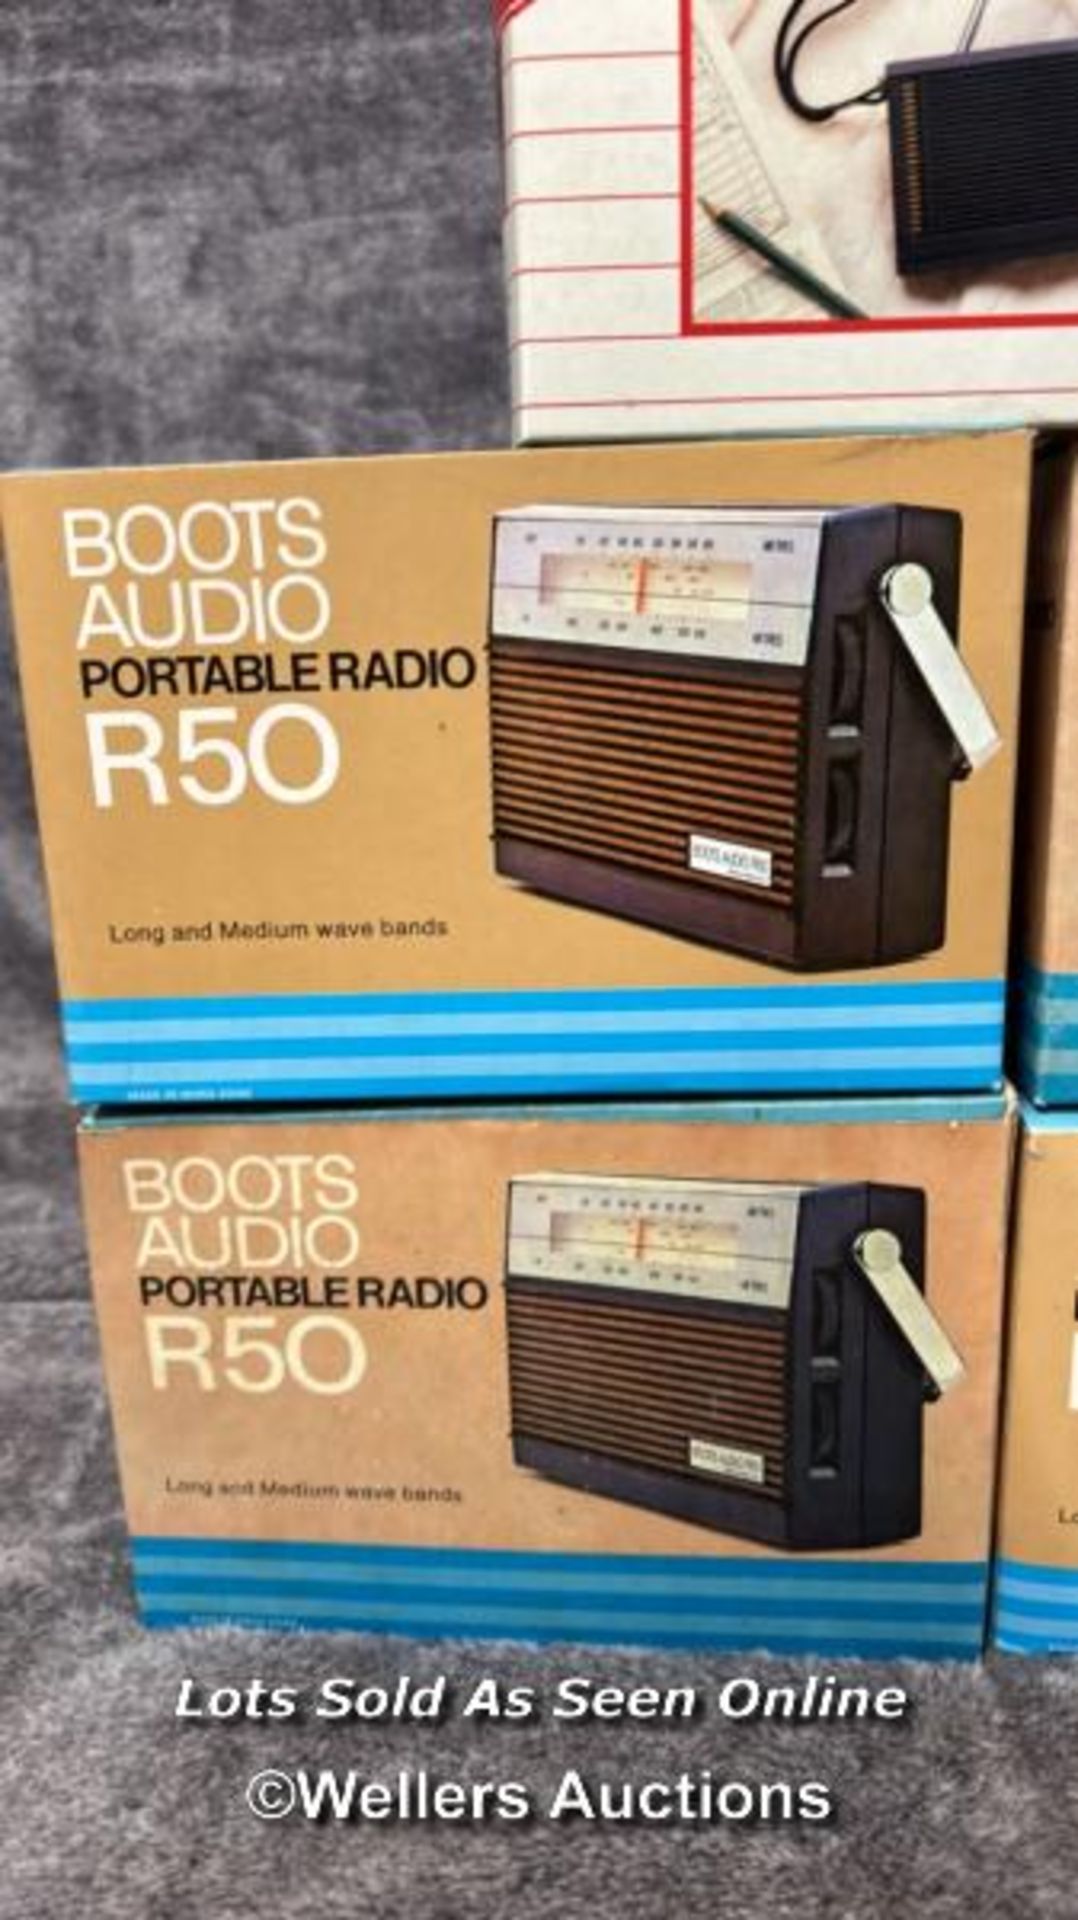 Six vintage 1980's Boots radios including four R50 models, from the private collection of the - Image 3 of 5